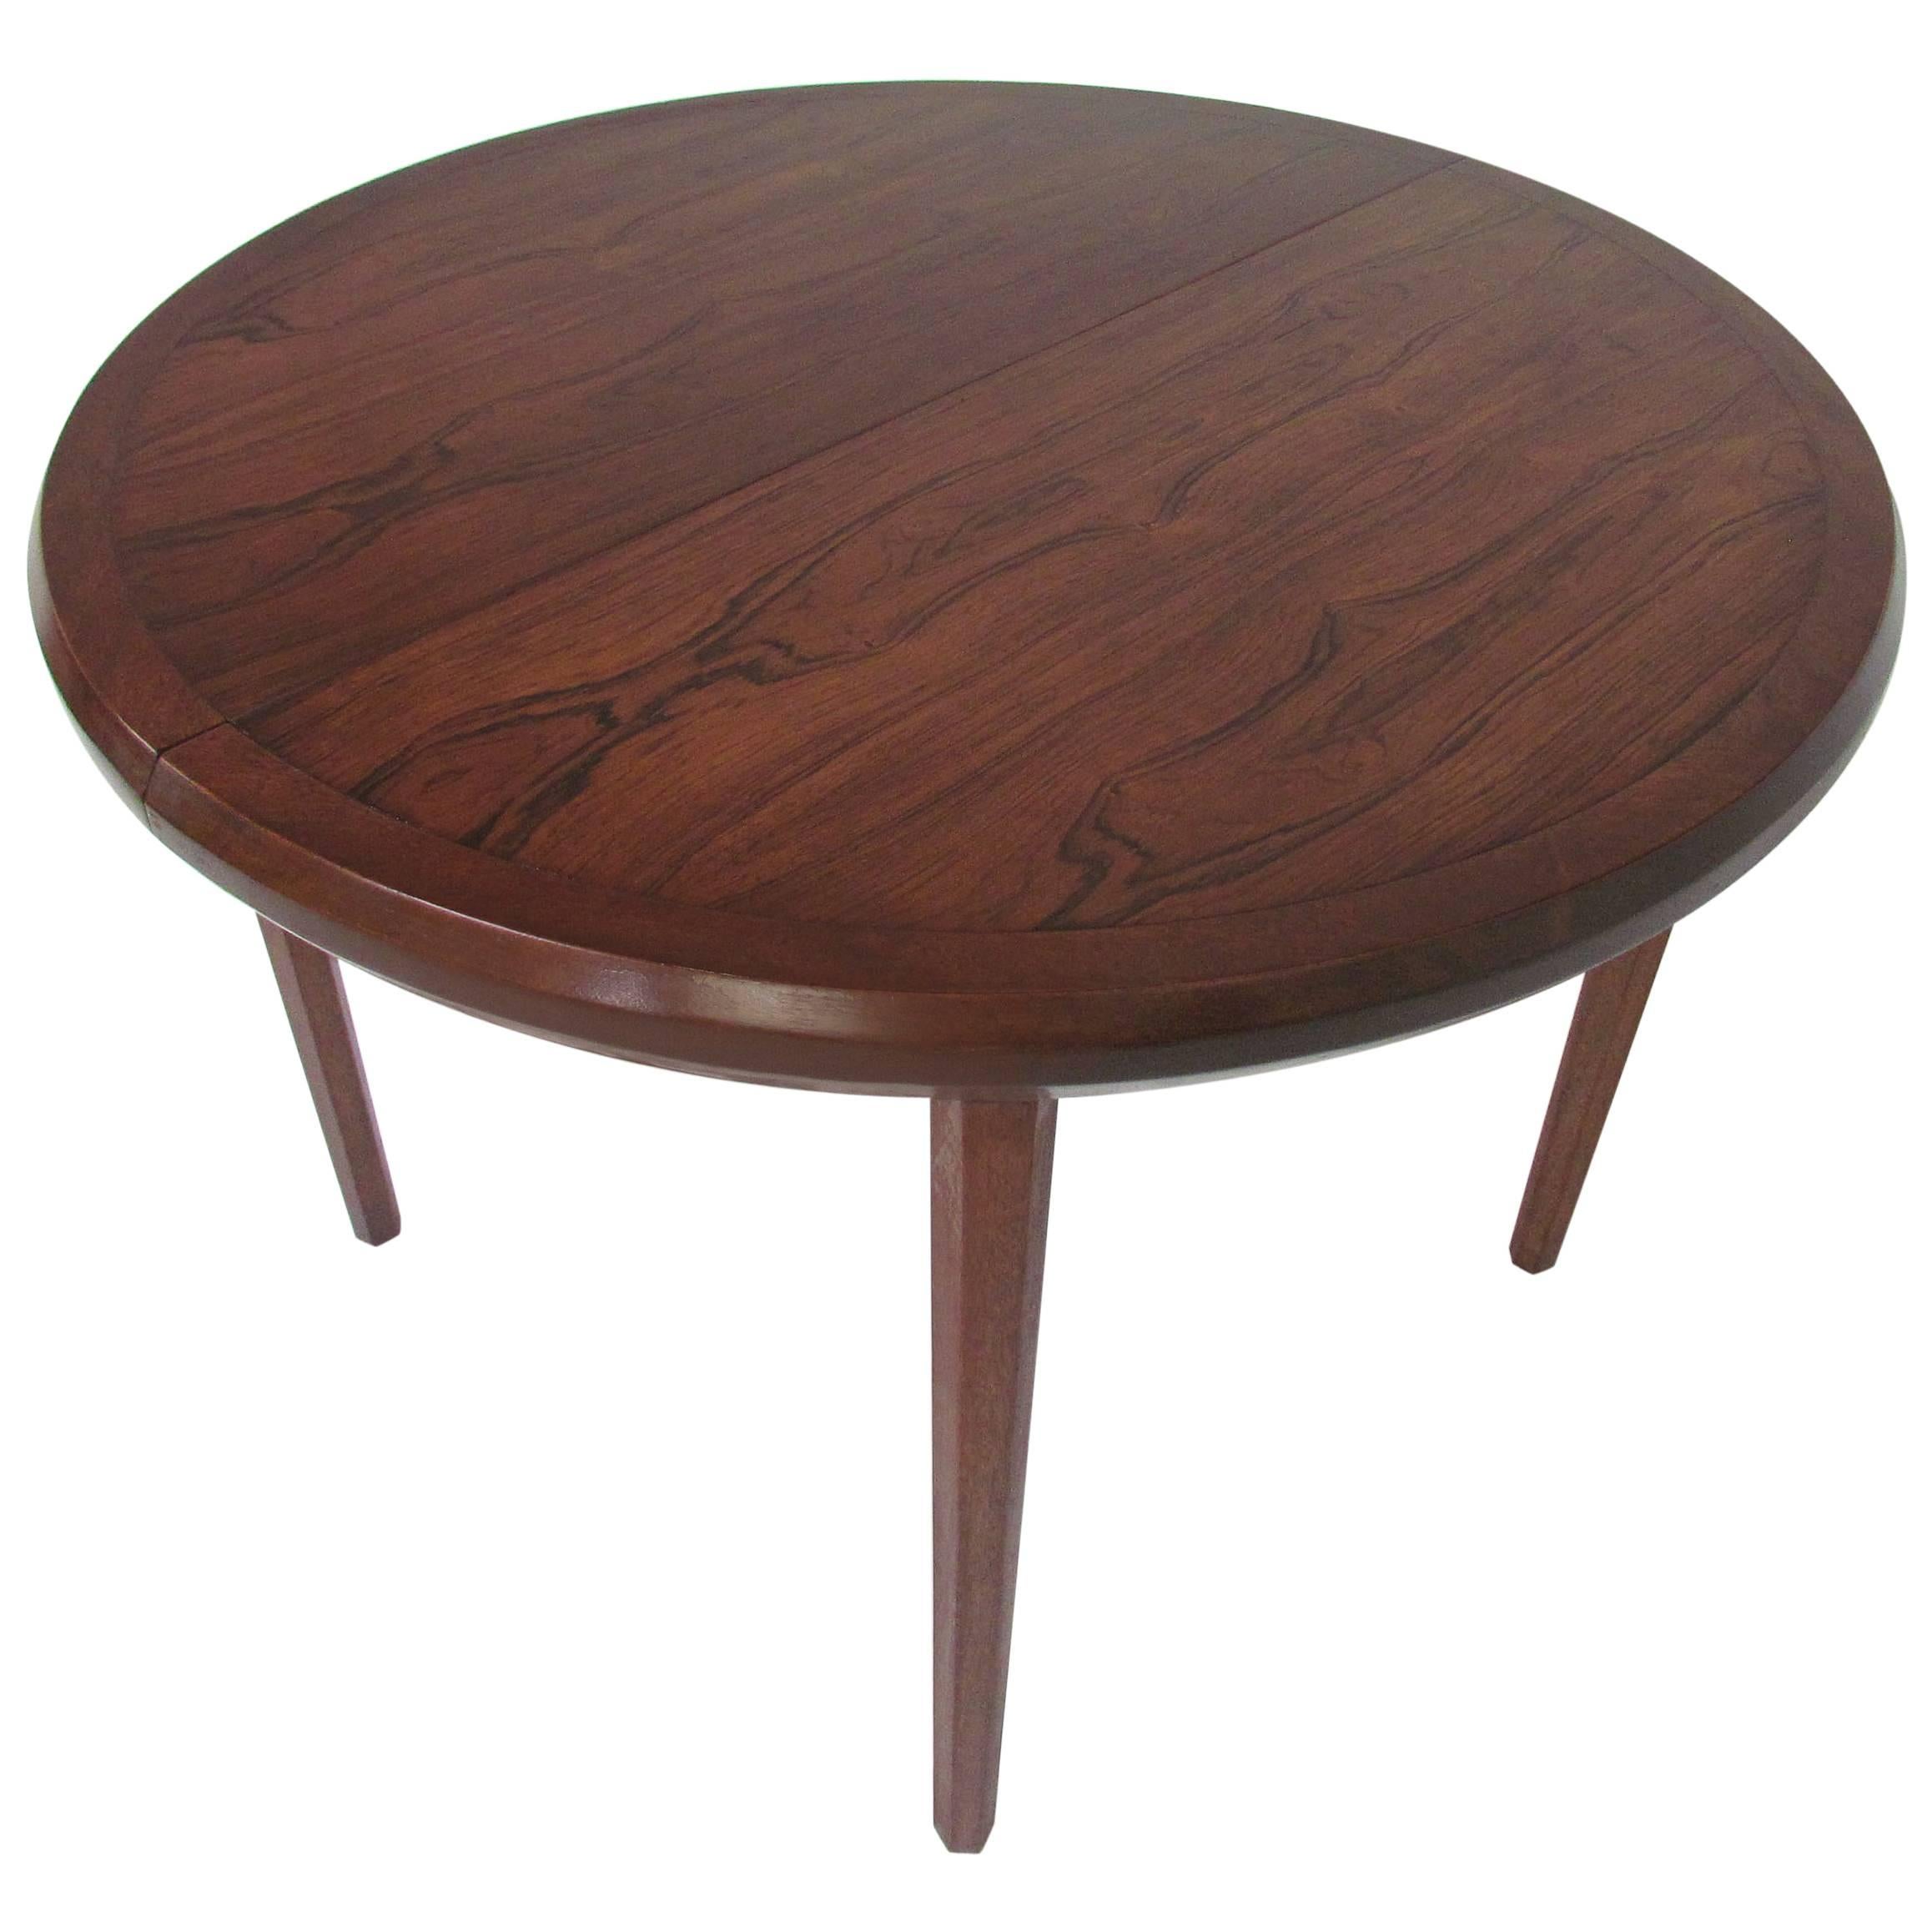 Mid-Century Circular Rosewood Dining Table with Three Leaves by John Stuart